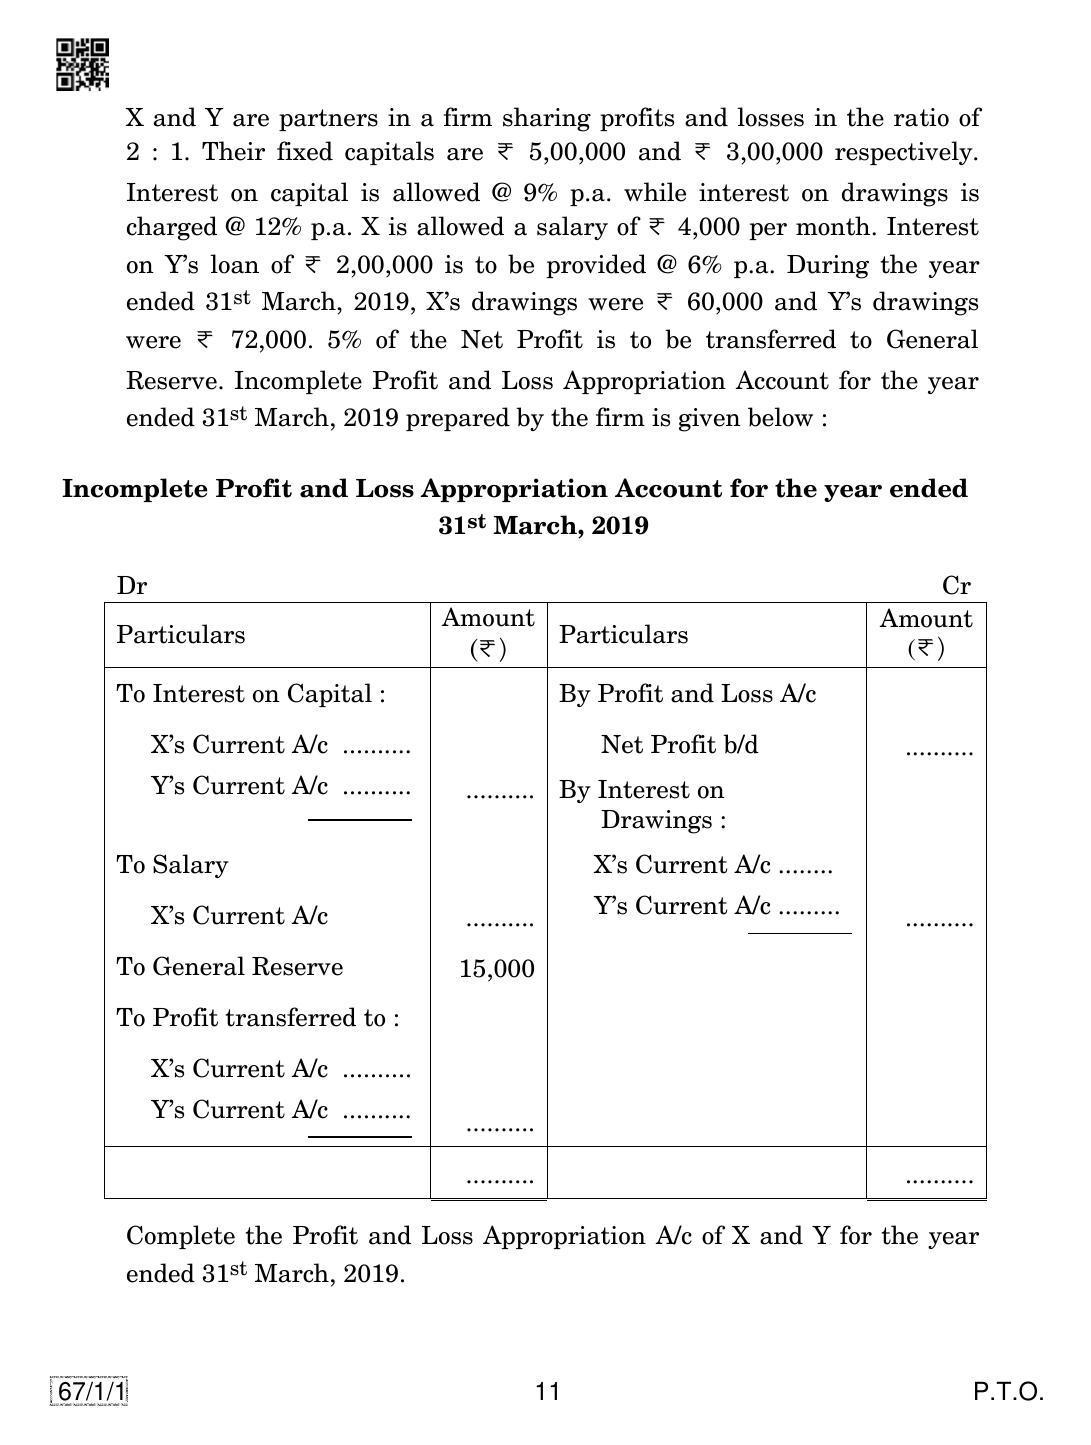 CBSE Class 12 67-1-1 ACCOUNTANCY 2019 Compartment Question Paper - Page 11